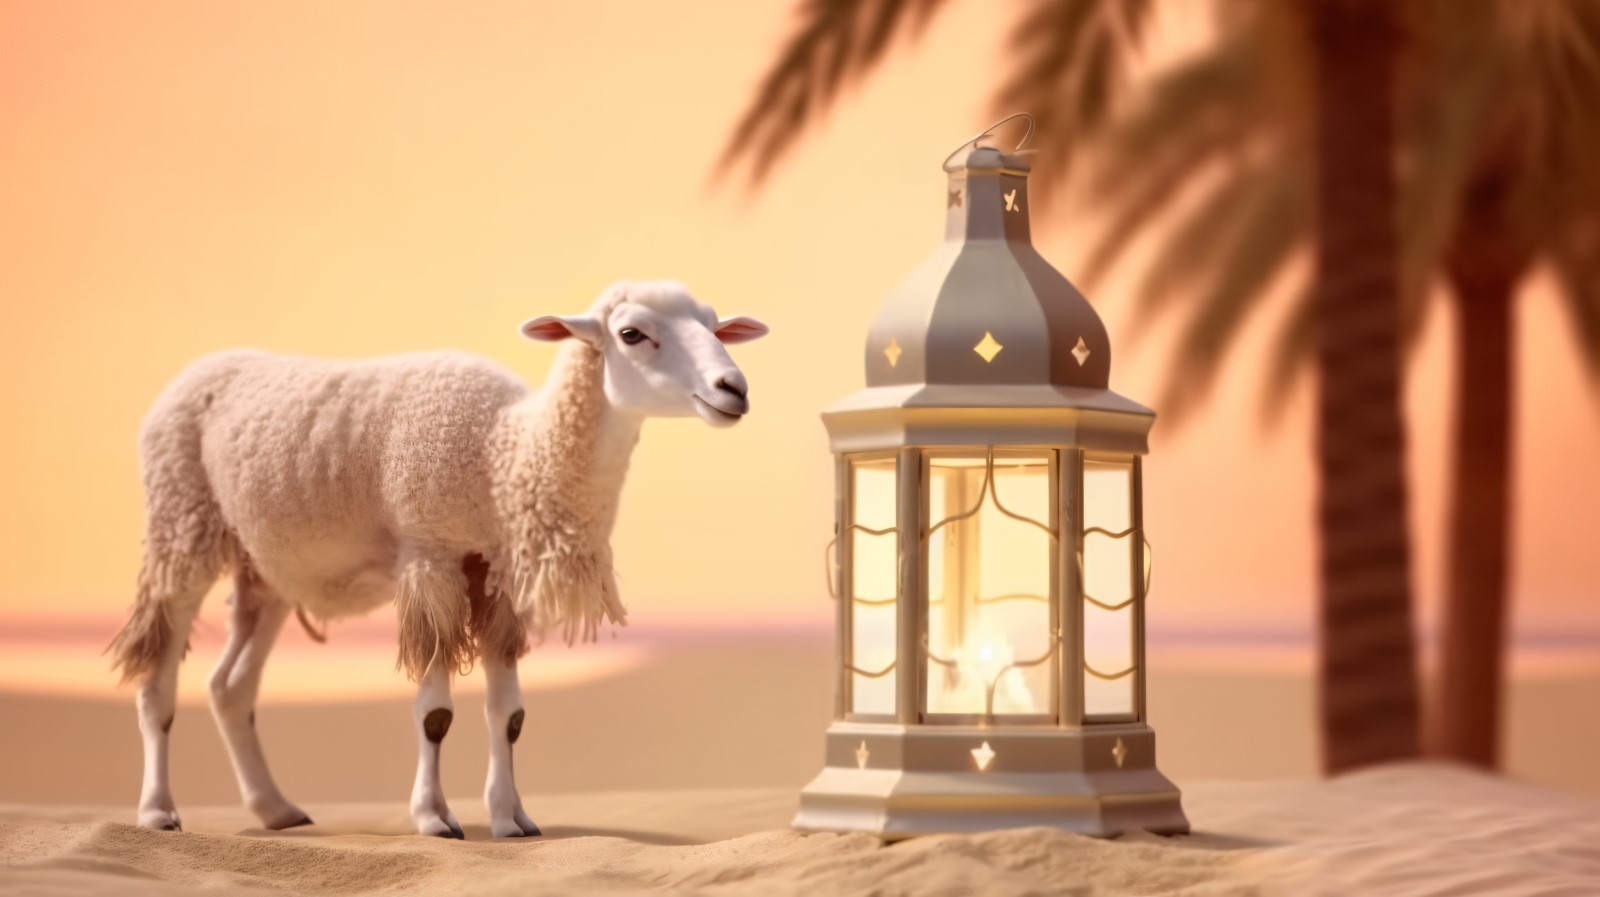 sheep on desert with lantern Islamic art in the background 10